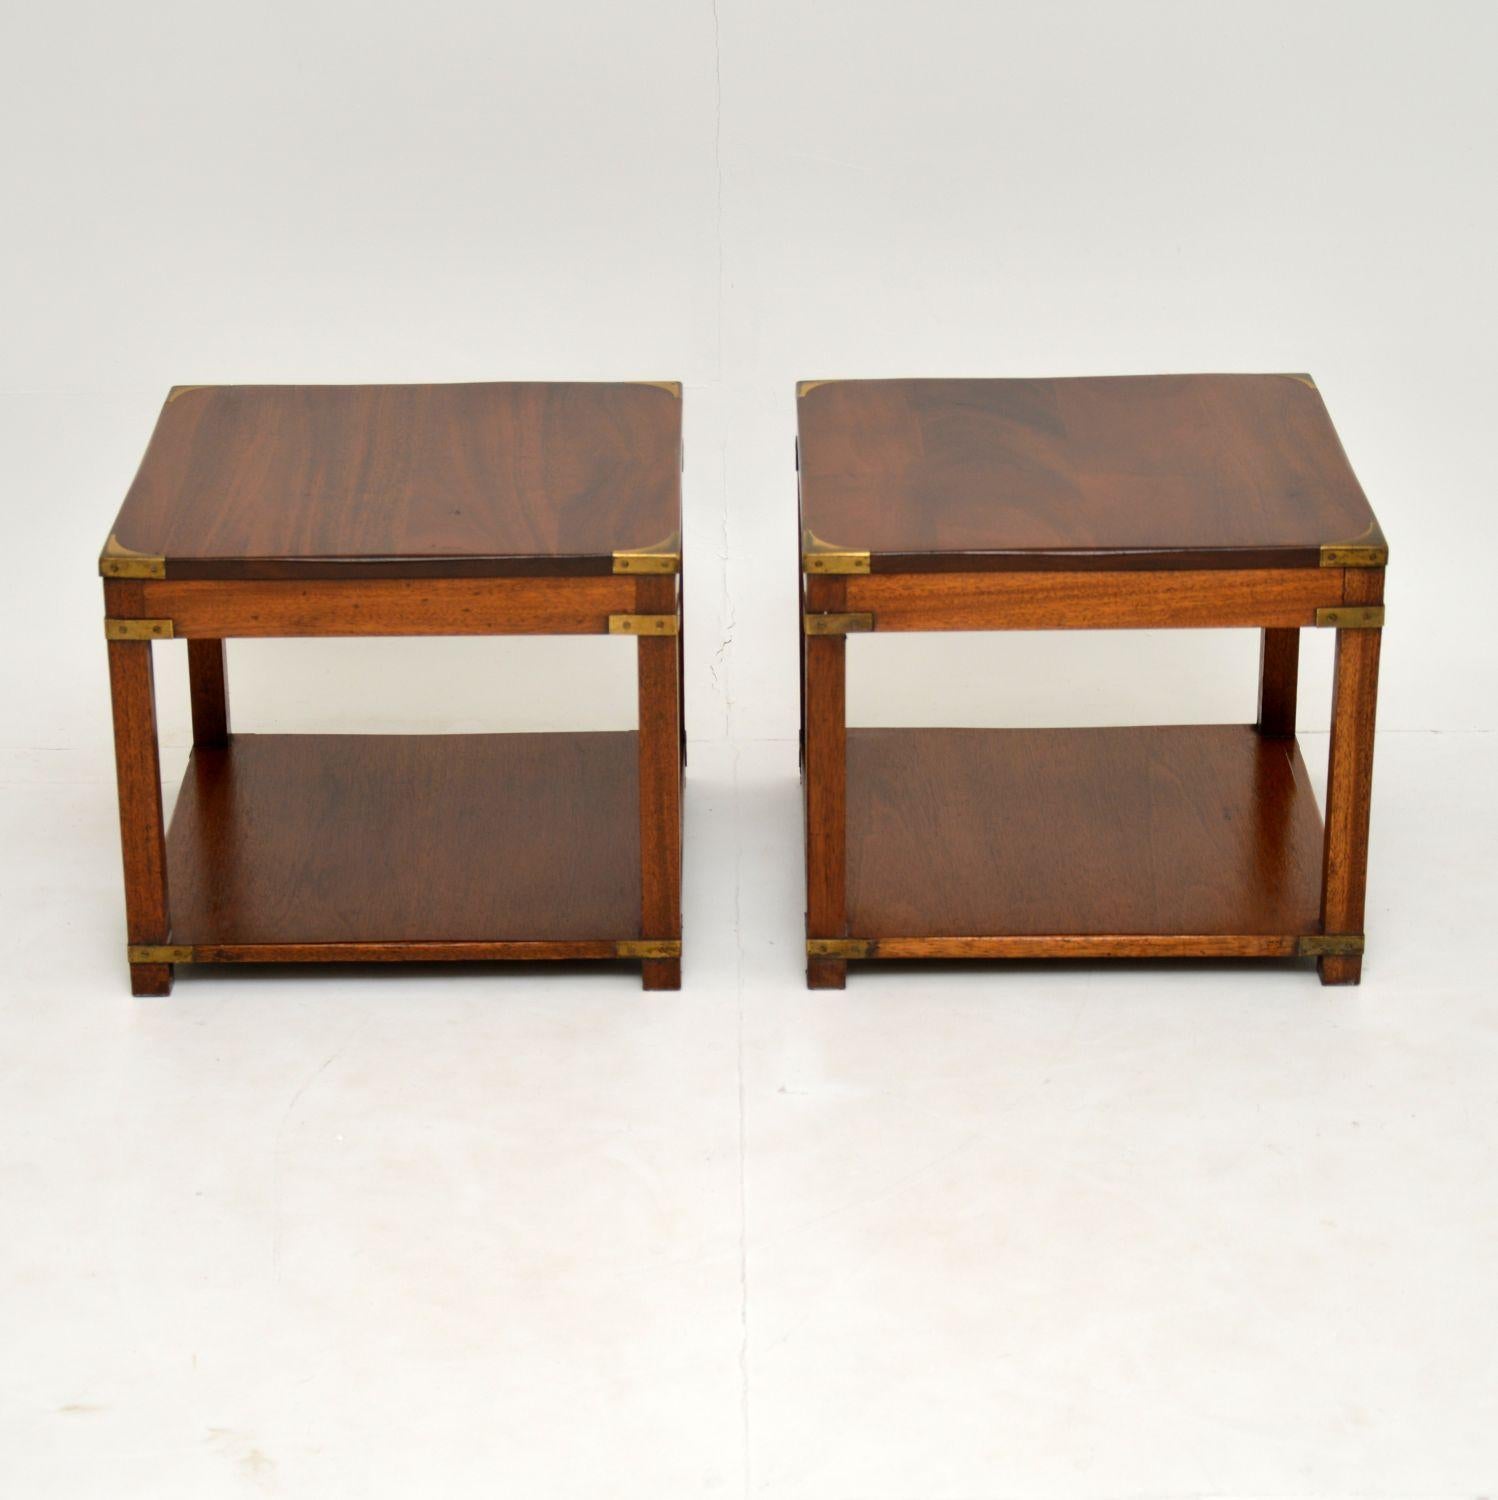 A smart and extremely well made pair of solid mahogany side tables, in the antique military campaign style.

These date from circa 1950s, they are a very useful size for lamp tables or bedside tables. They are sturdy and of excellent quality. We